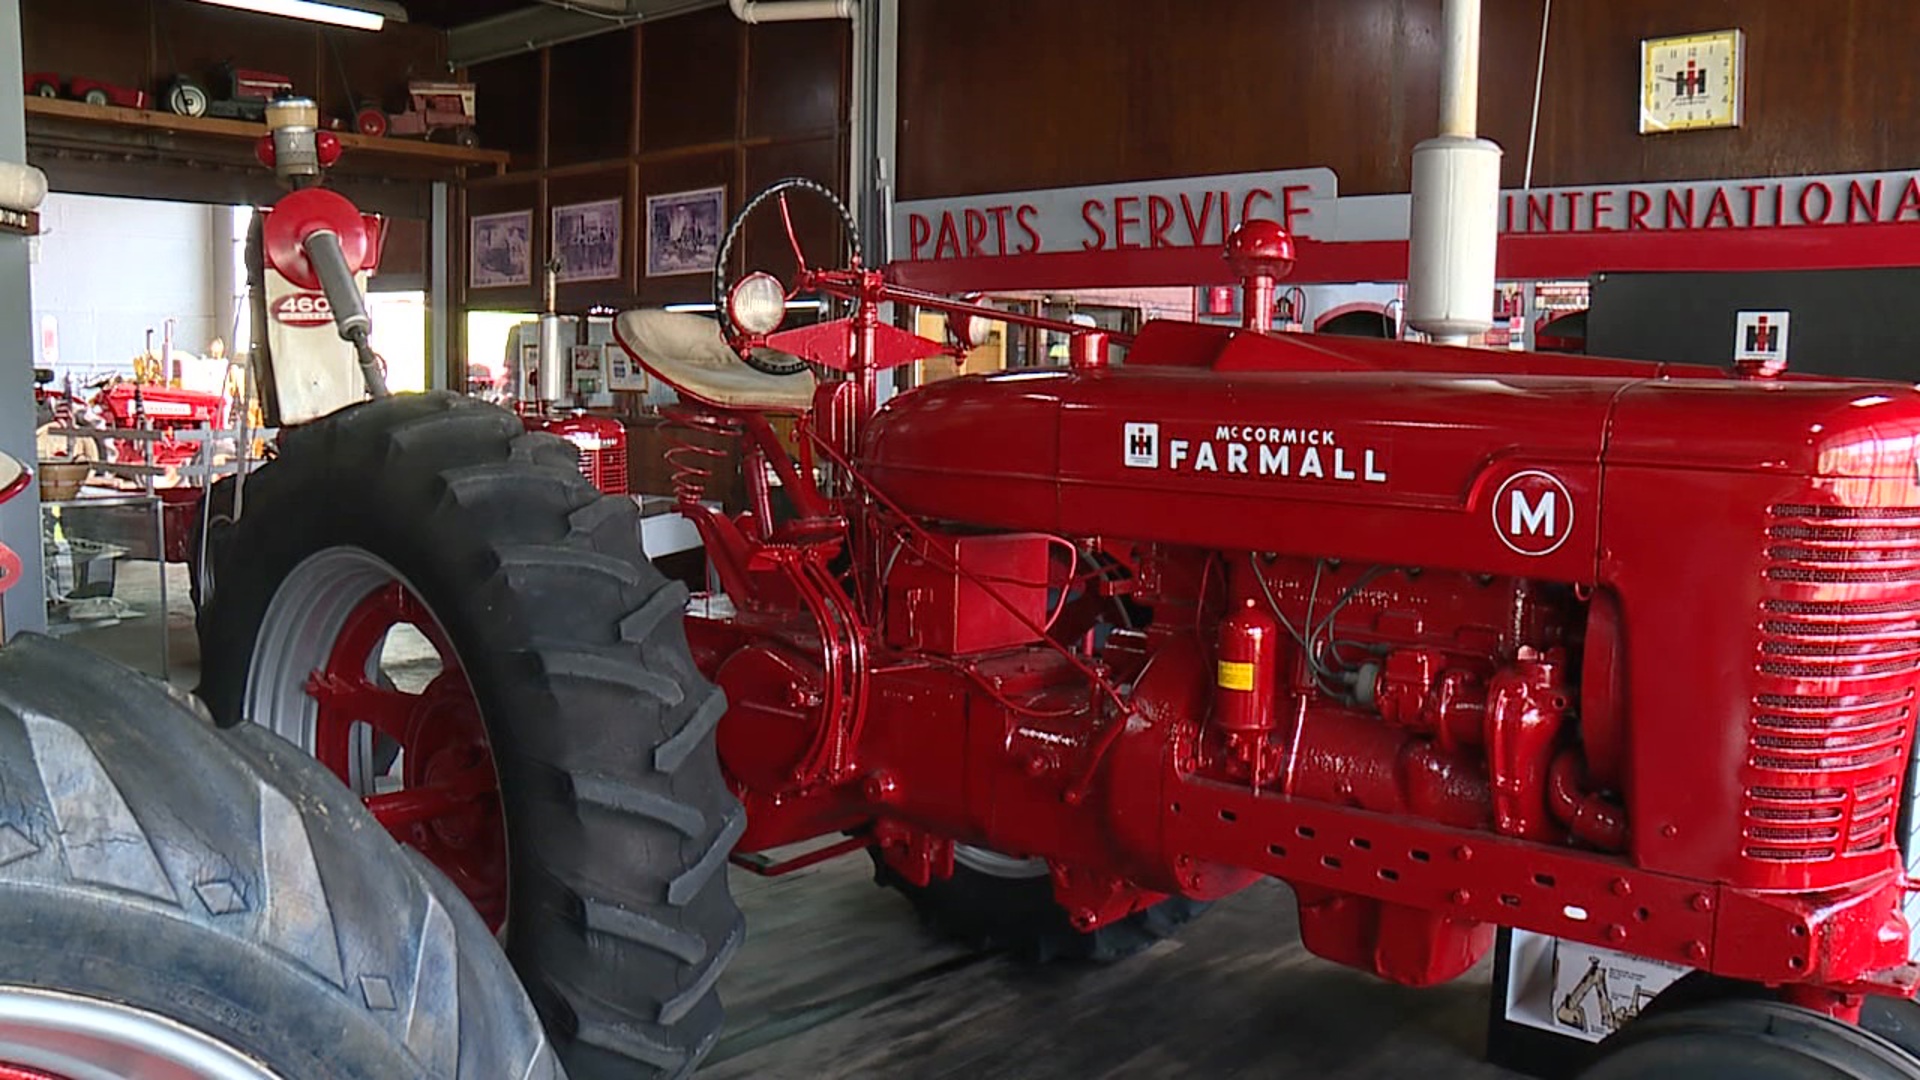 The history of one of America's most iconic manufacturers is preserved right here in our area.